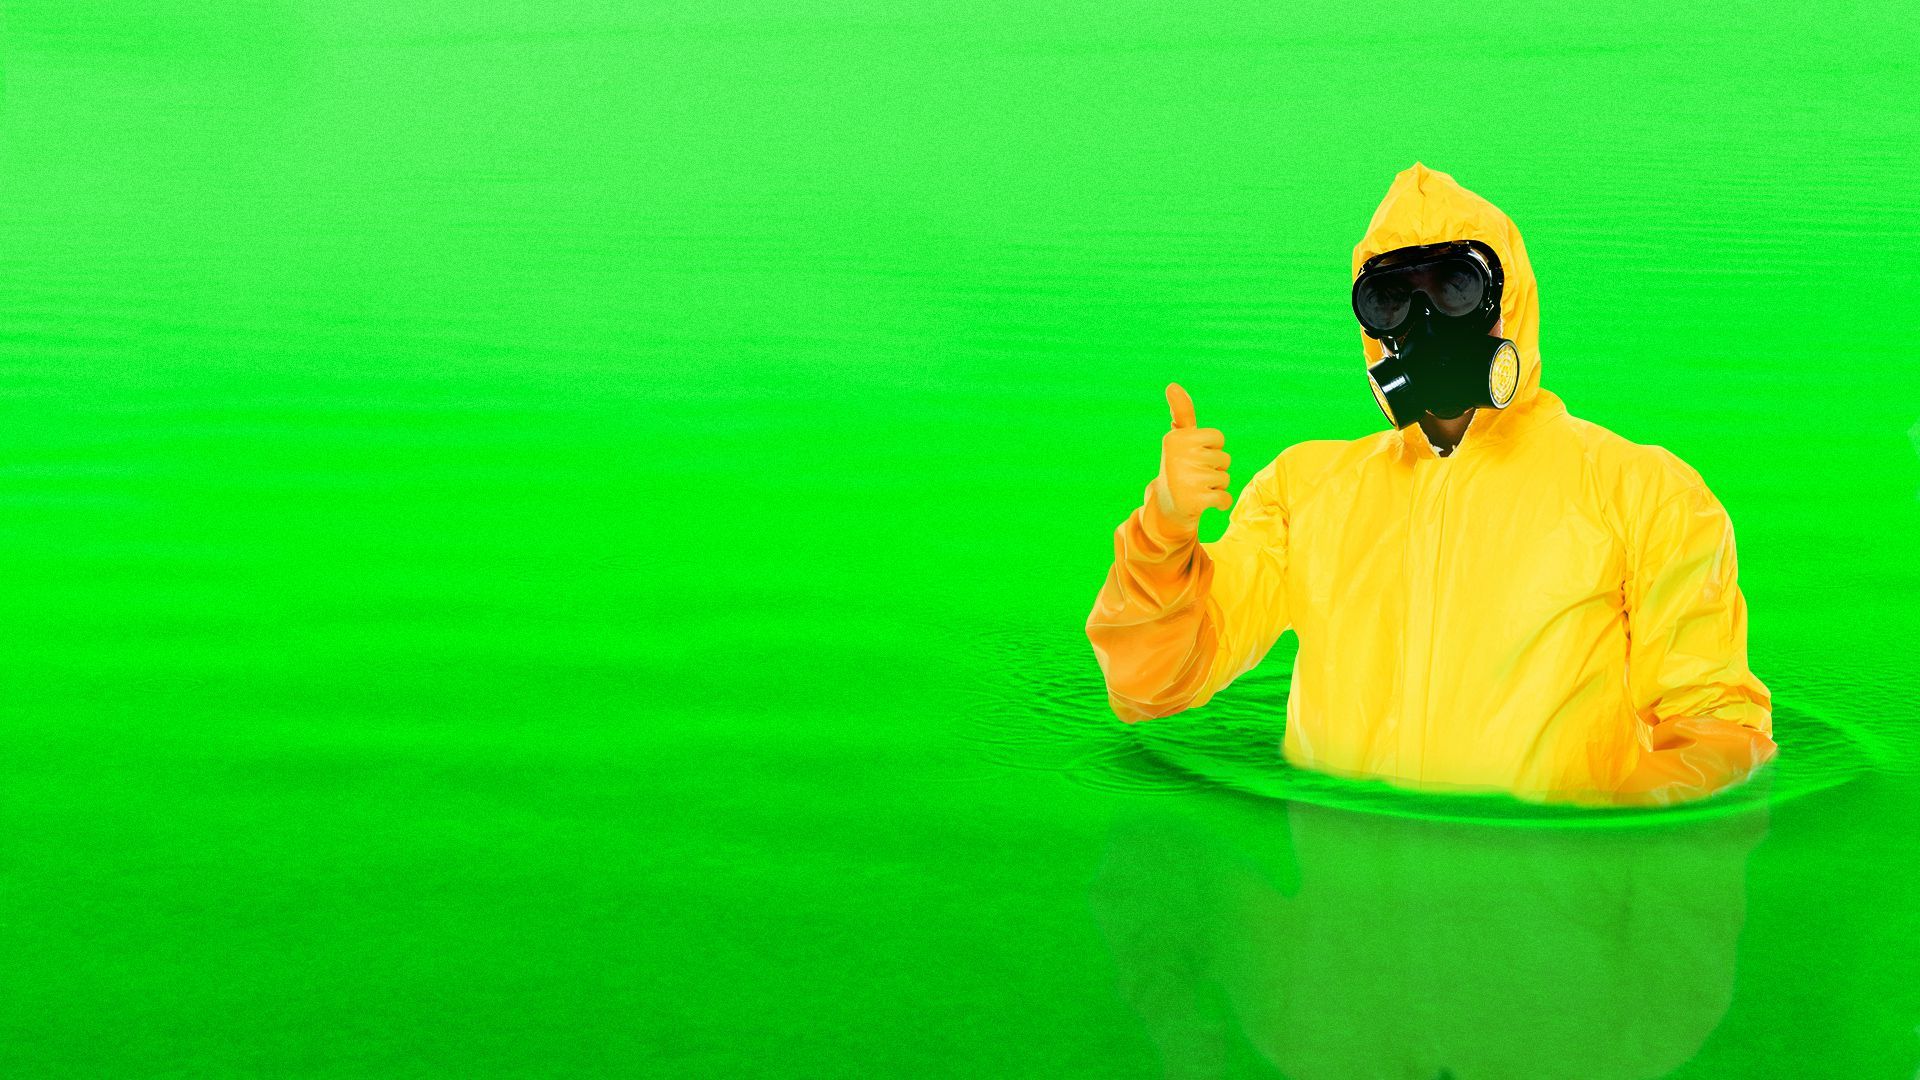 Illustration of a person in a hazmat suit giving a thumbs up while waist deep in radioactive liquid.  